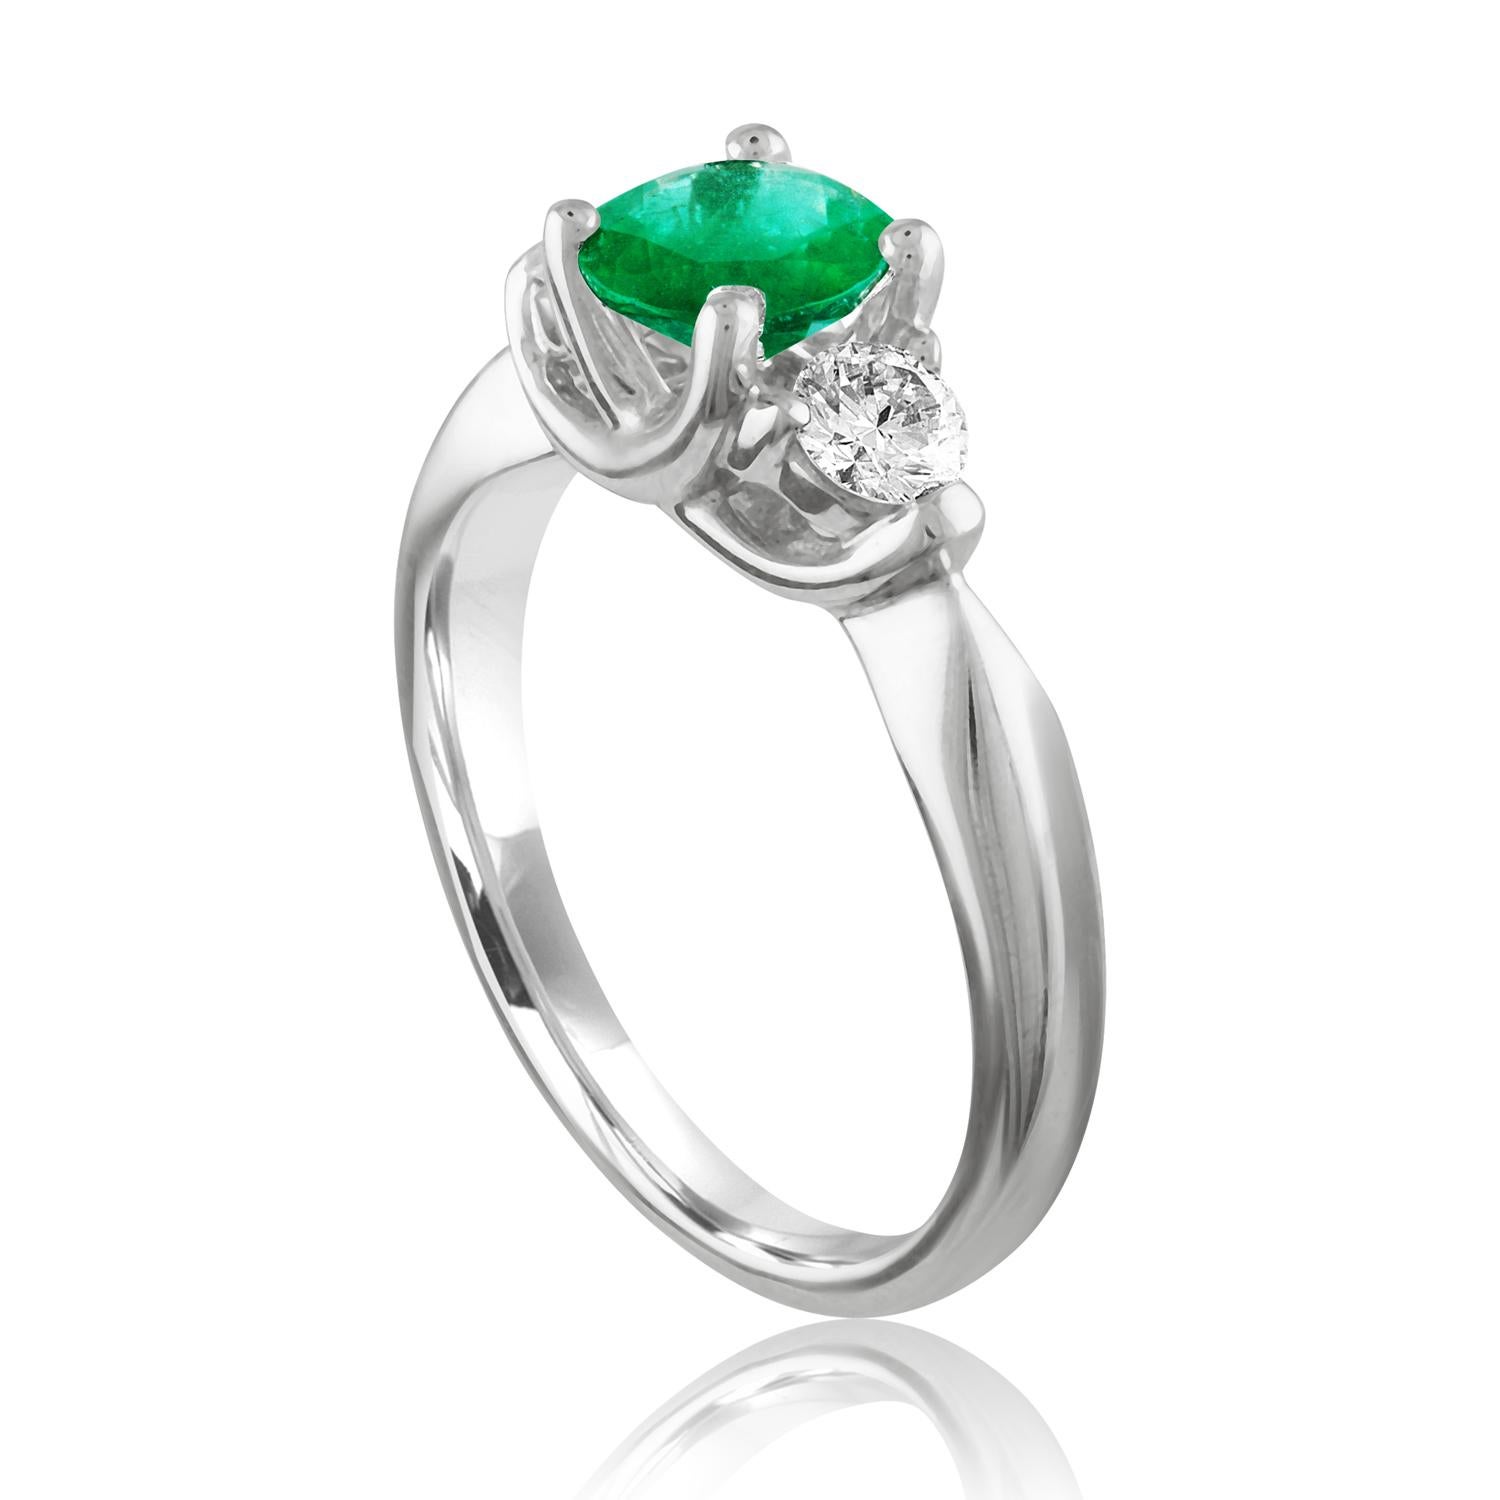 Beautiful 3 Stone Emerald Ring
The ring is 18K White Gold.
The Center is a beautiful Round 0.96 Carat Emerald.
The Emerald is AGL certified.
There are 2 side stones 0.37 Carats Diamonds F/G VS/SI
The ring is a size 6.50, sizable.
The ring weighs 4.6